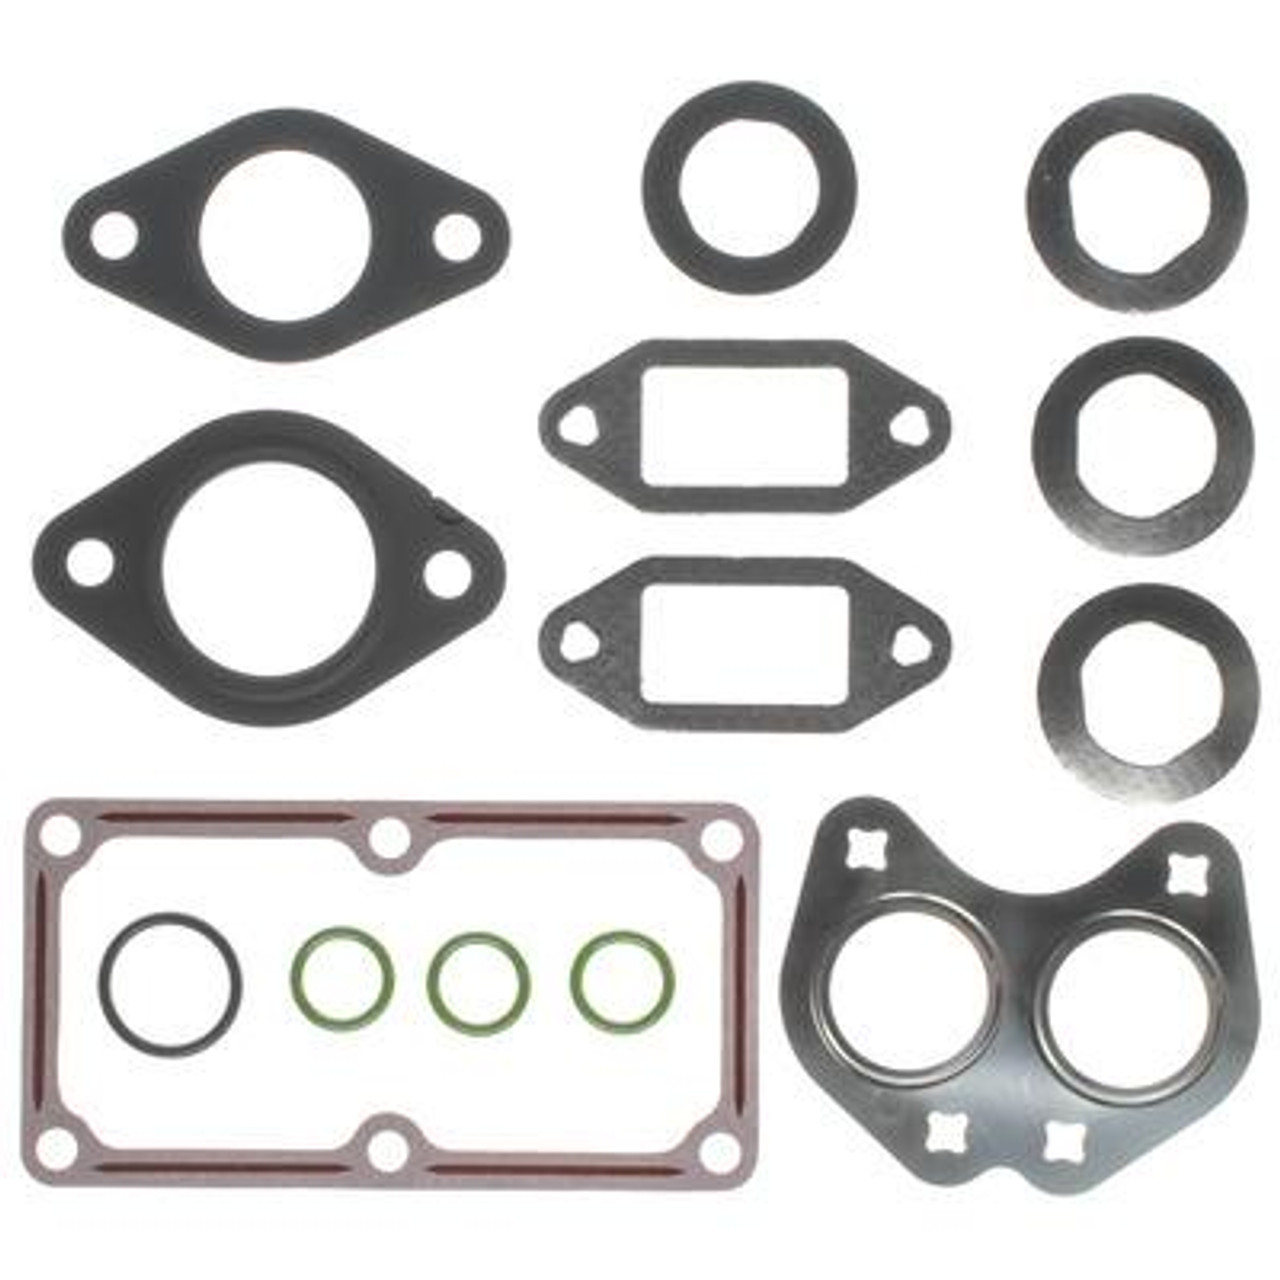 Mahle EGR Gasket Kit 2007.5 to 2018 6.7L Cummins (MCIGS33893)-Main View